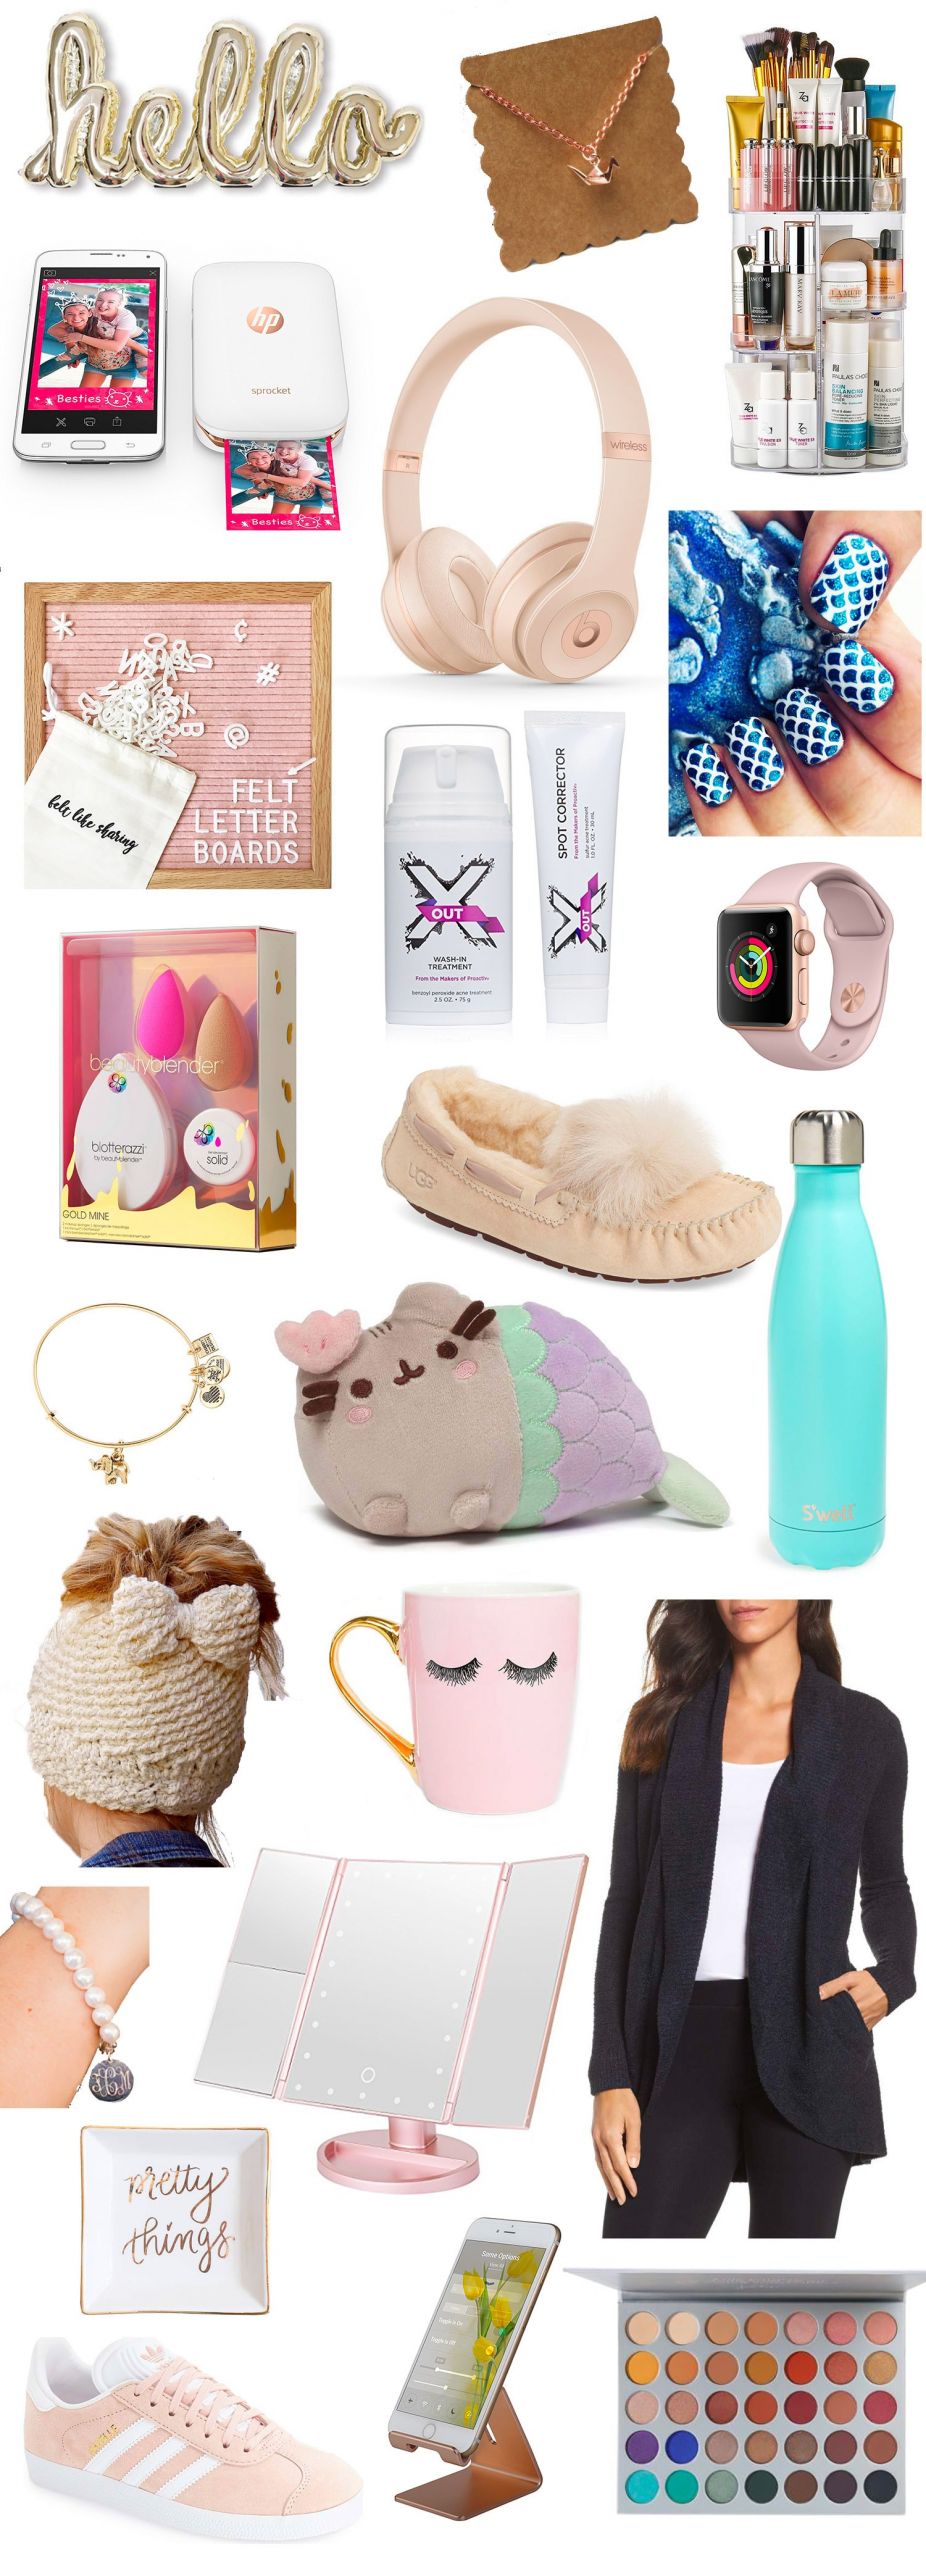 Cool Gift Ideas For Teenage Girls
 Top Gifts for Teens This Christmas